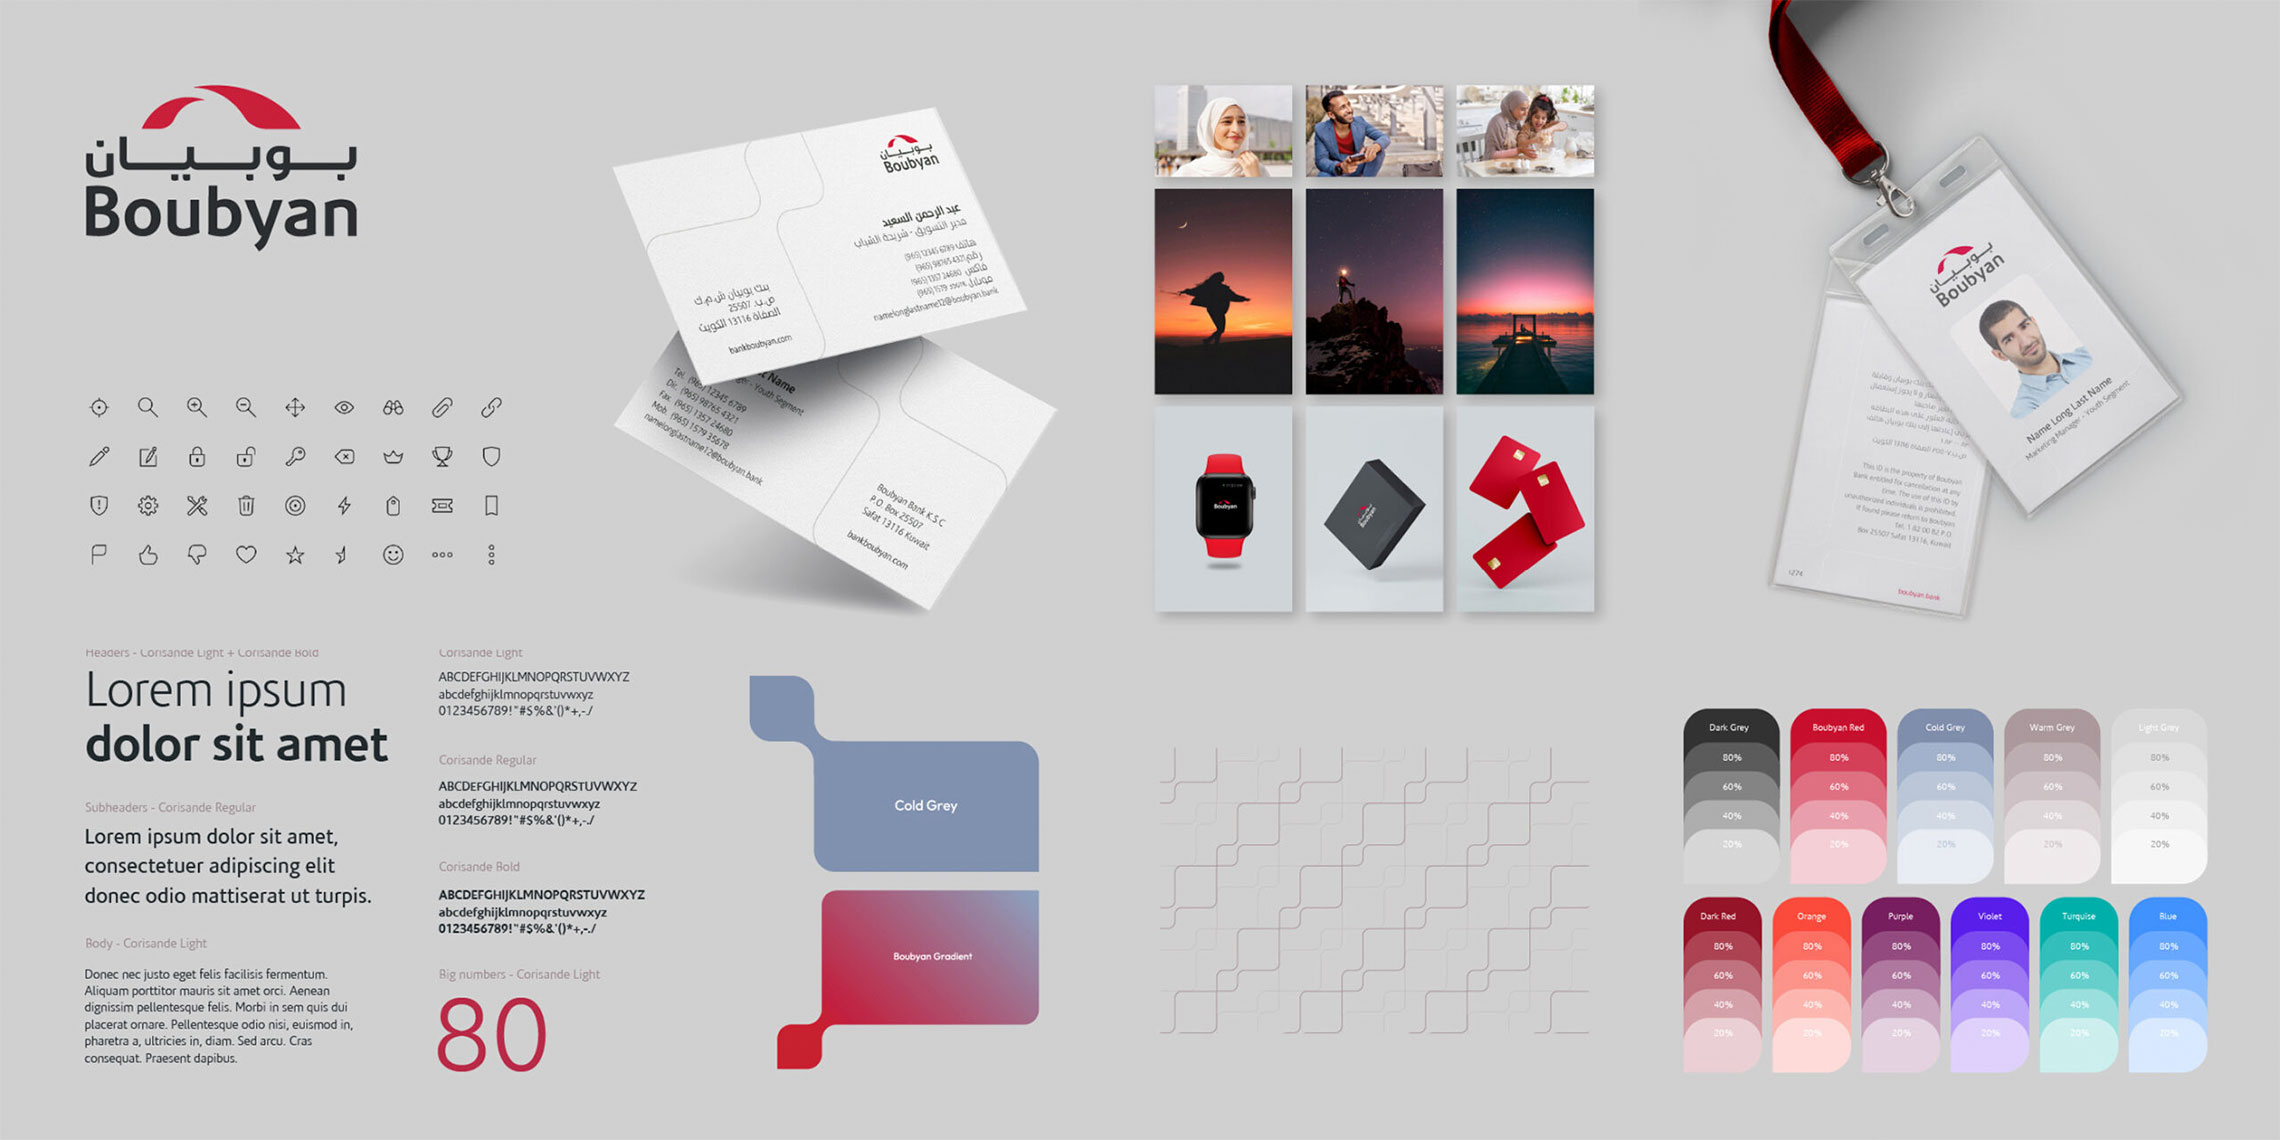 Boubyan brand design system with examples of applications against a grey background